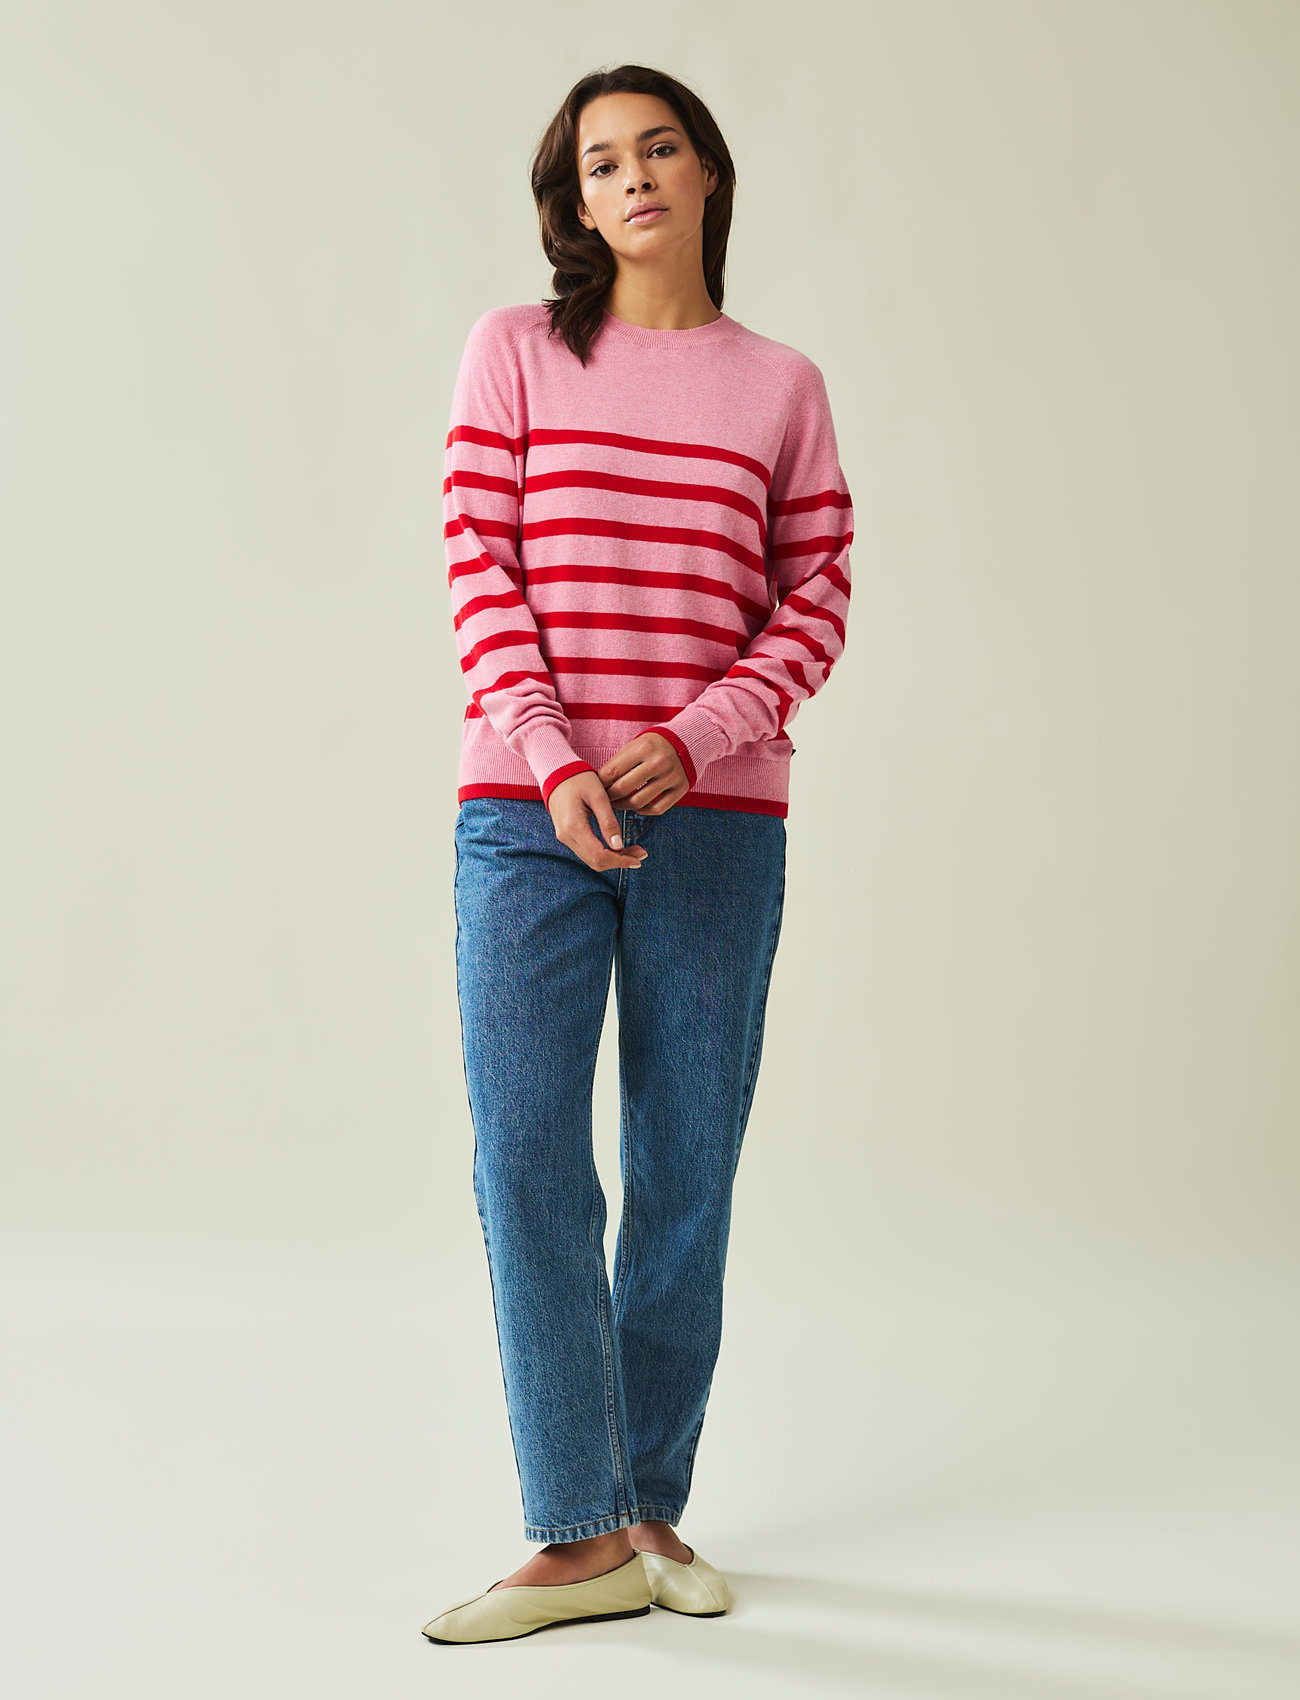 Lexington Clothing - Freya Cotton/Cashmere Sweater - pullover - pink/red stripe - 1